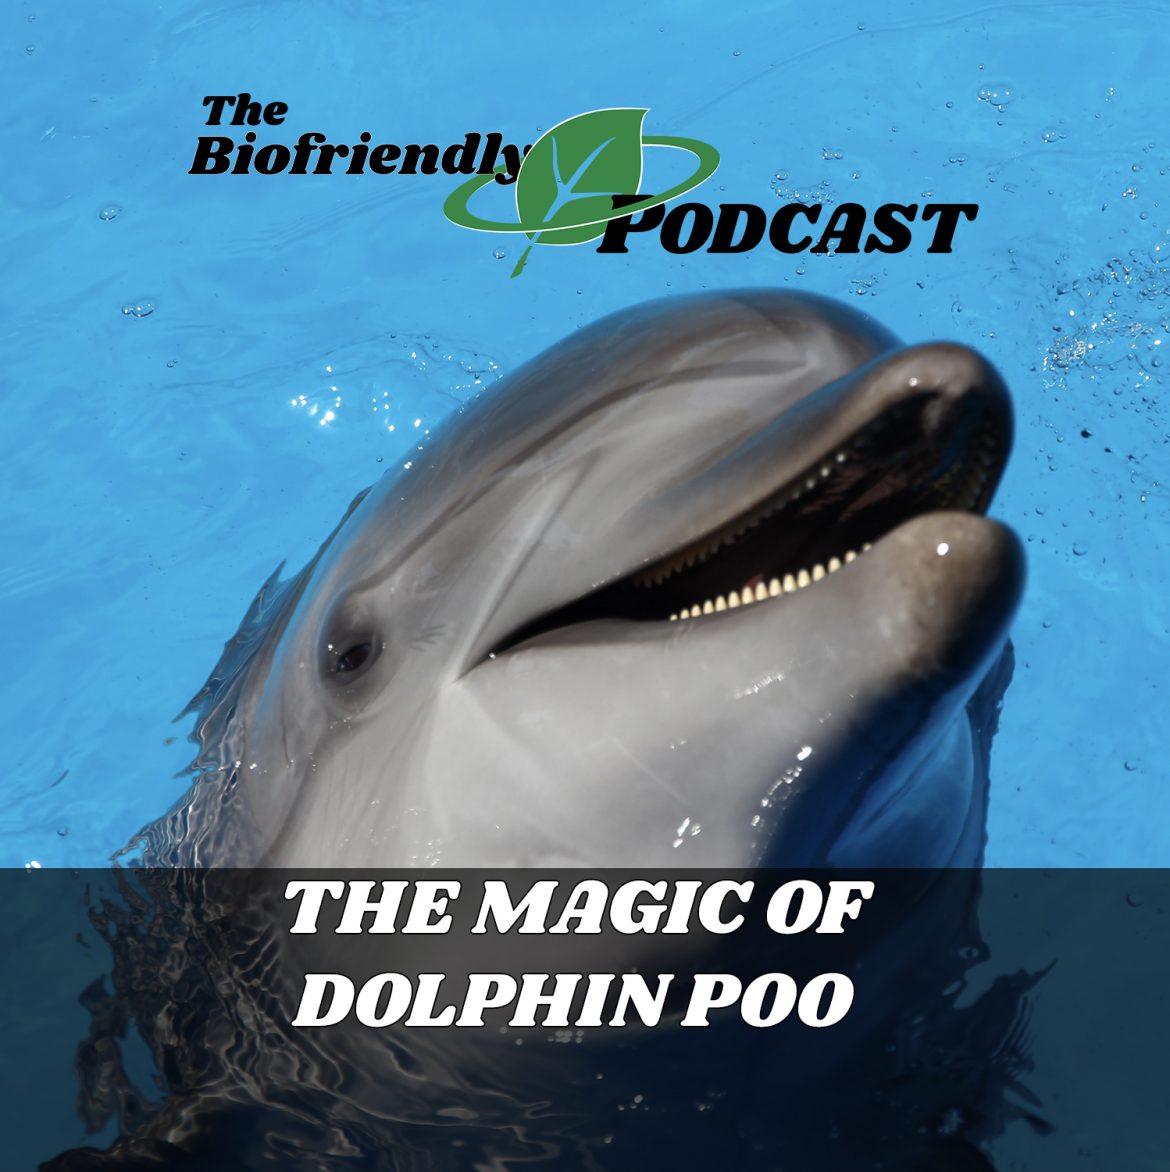 The Magic of Dolphin Poo